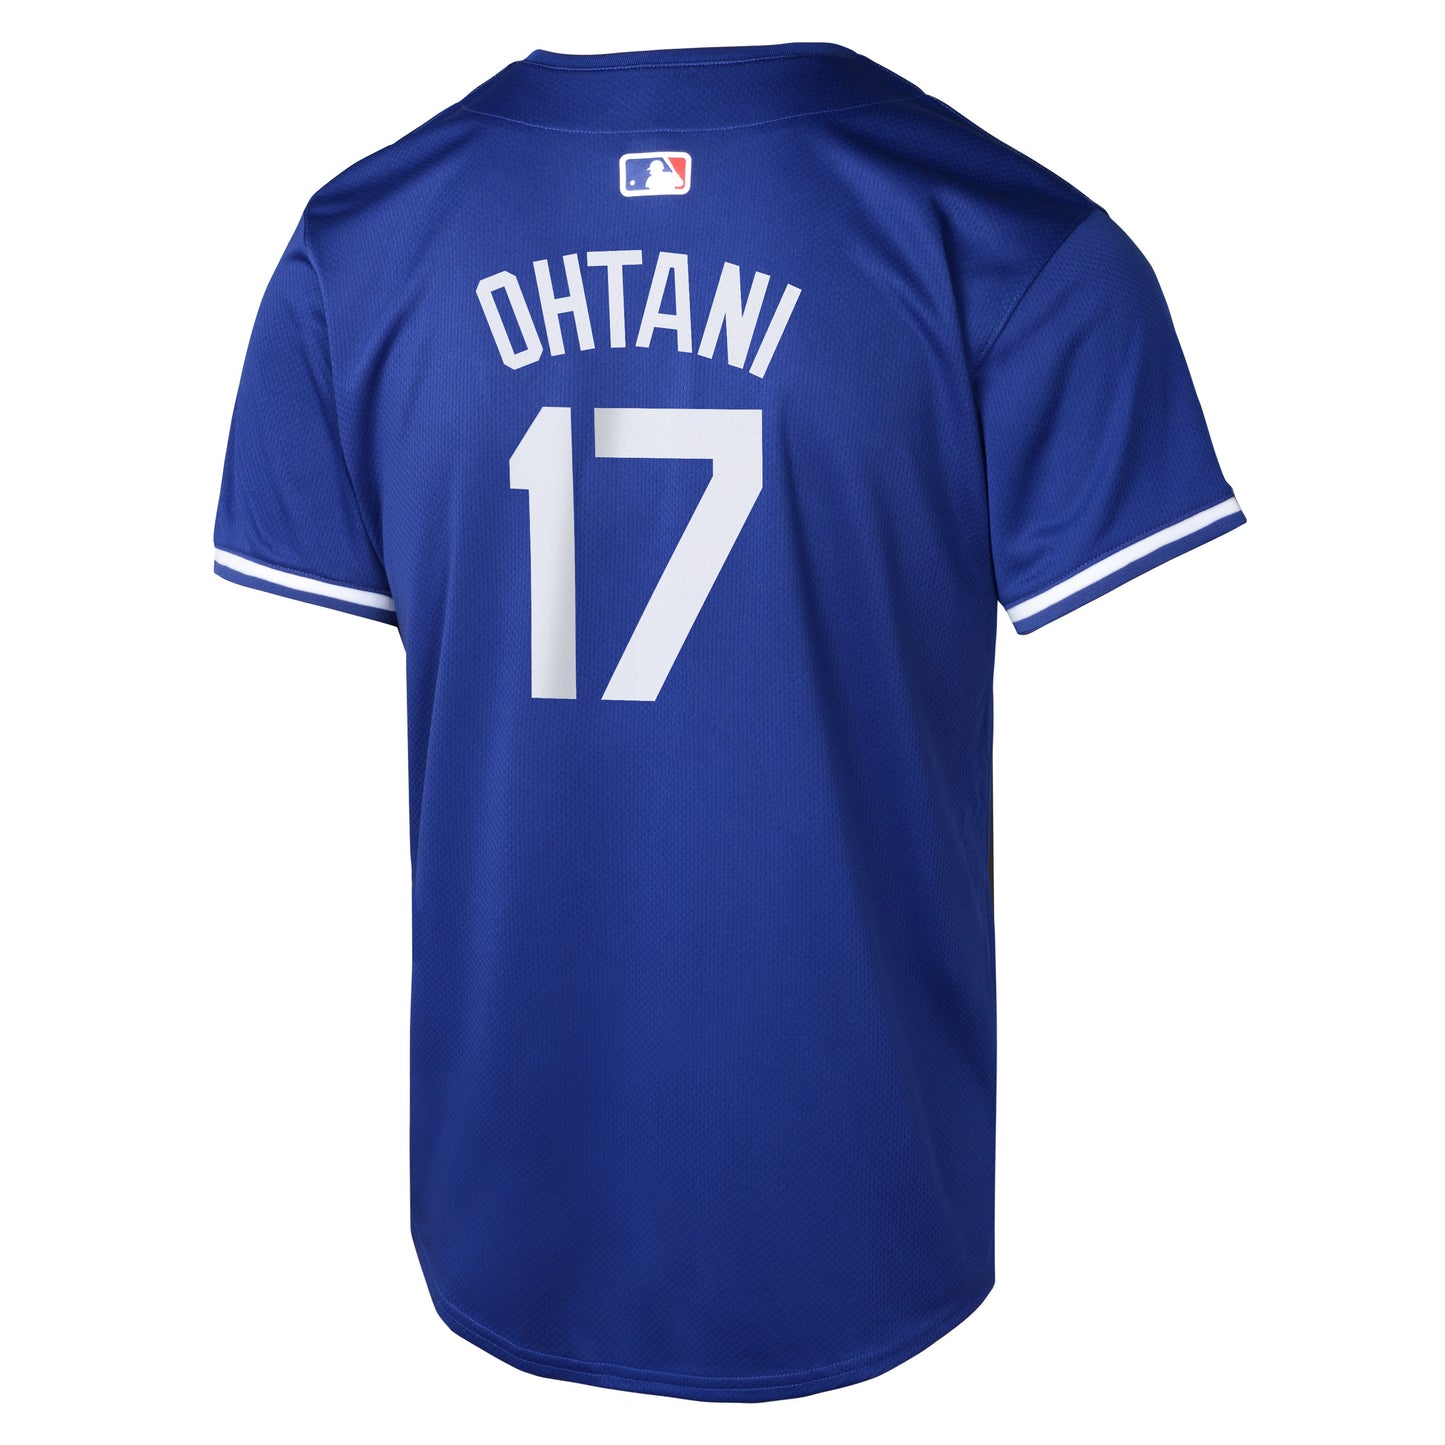 Youth Shohei Ohtani Los Angeles Dodgers NIKE Royal Blue Alternate Limited Replica Jersey